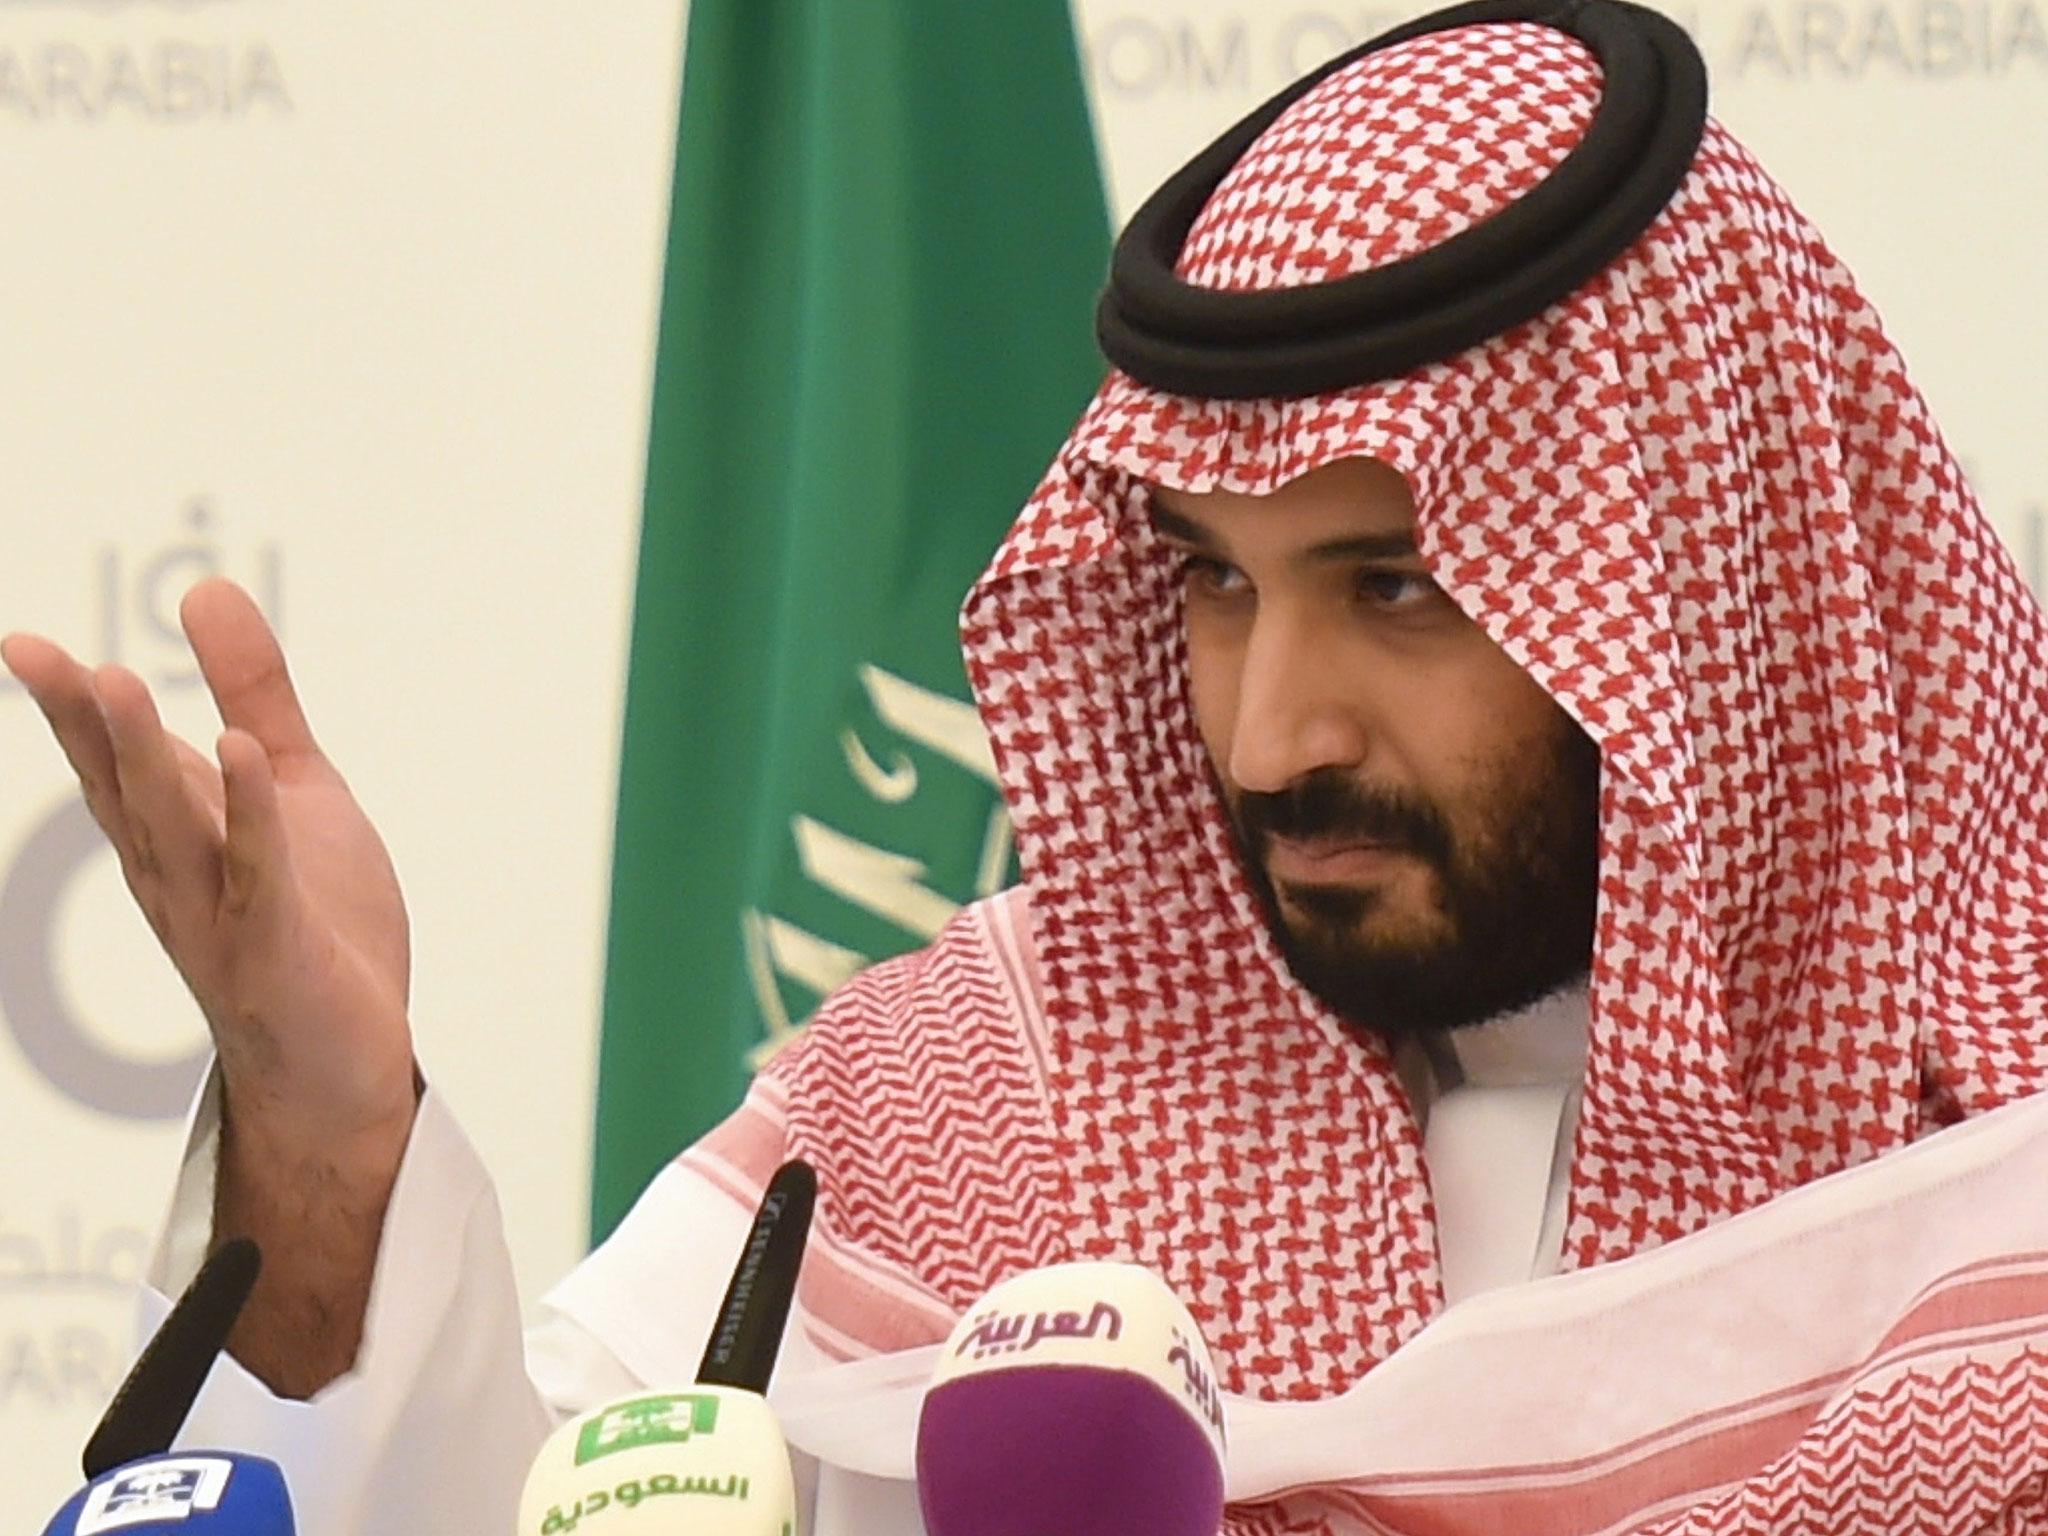 Prince Salman attracted criticism internationally for plunging Saudi Arabia into a bloody intervention in the Yemeni civil war